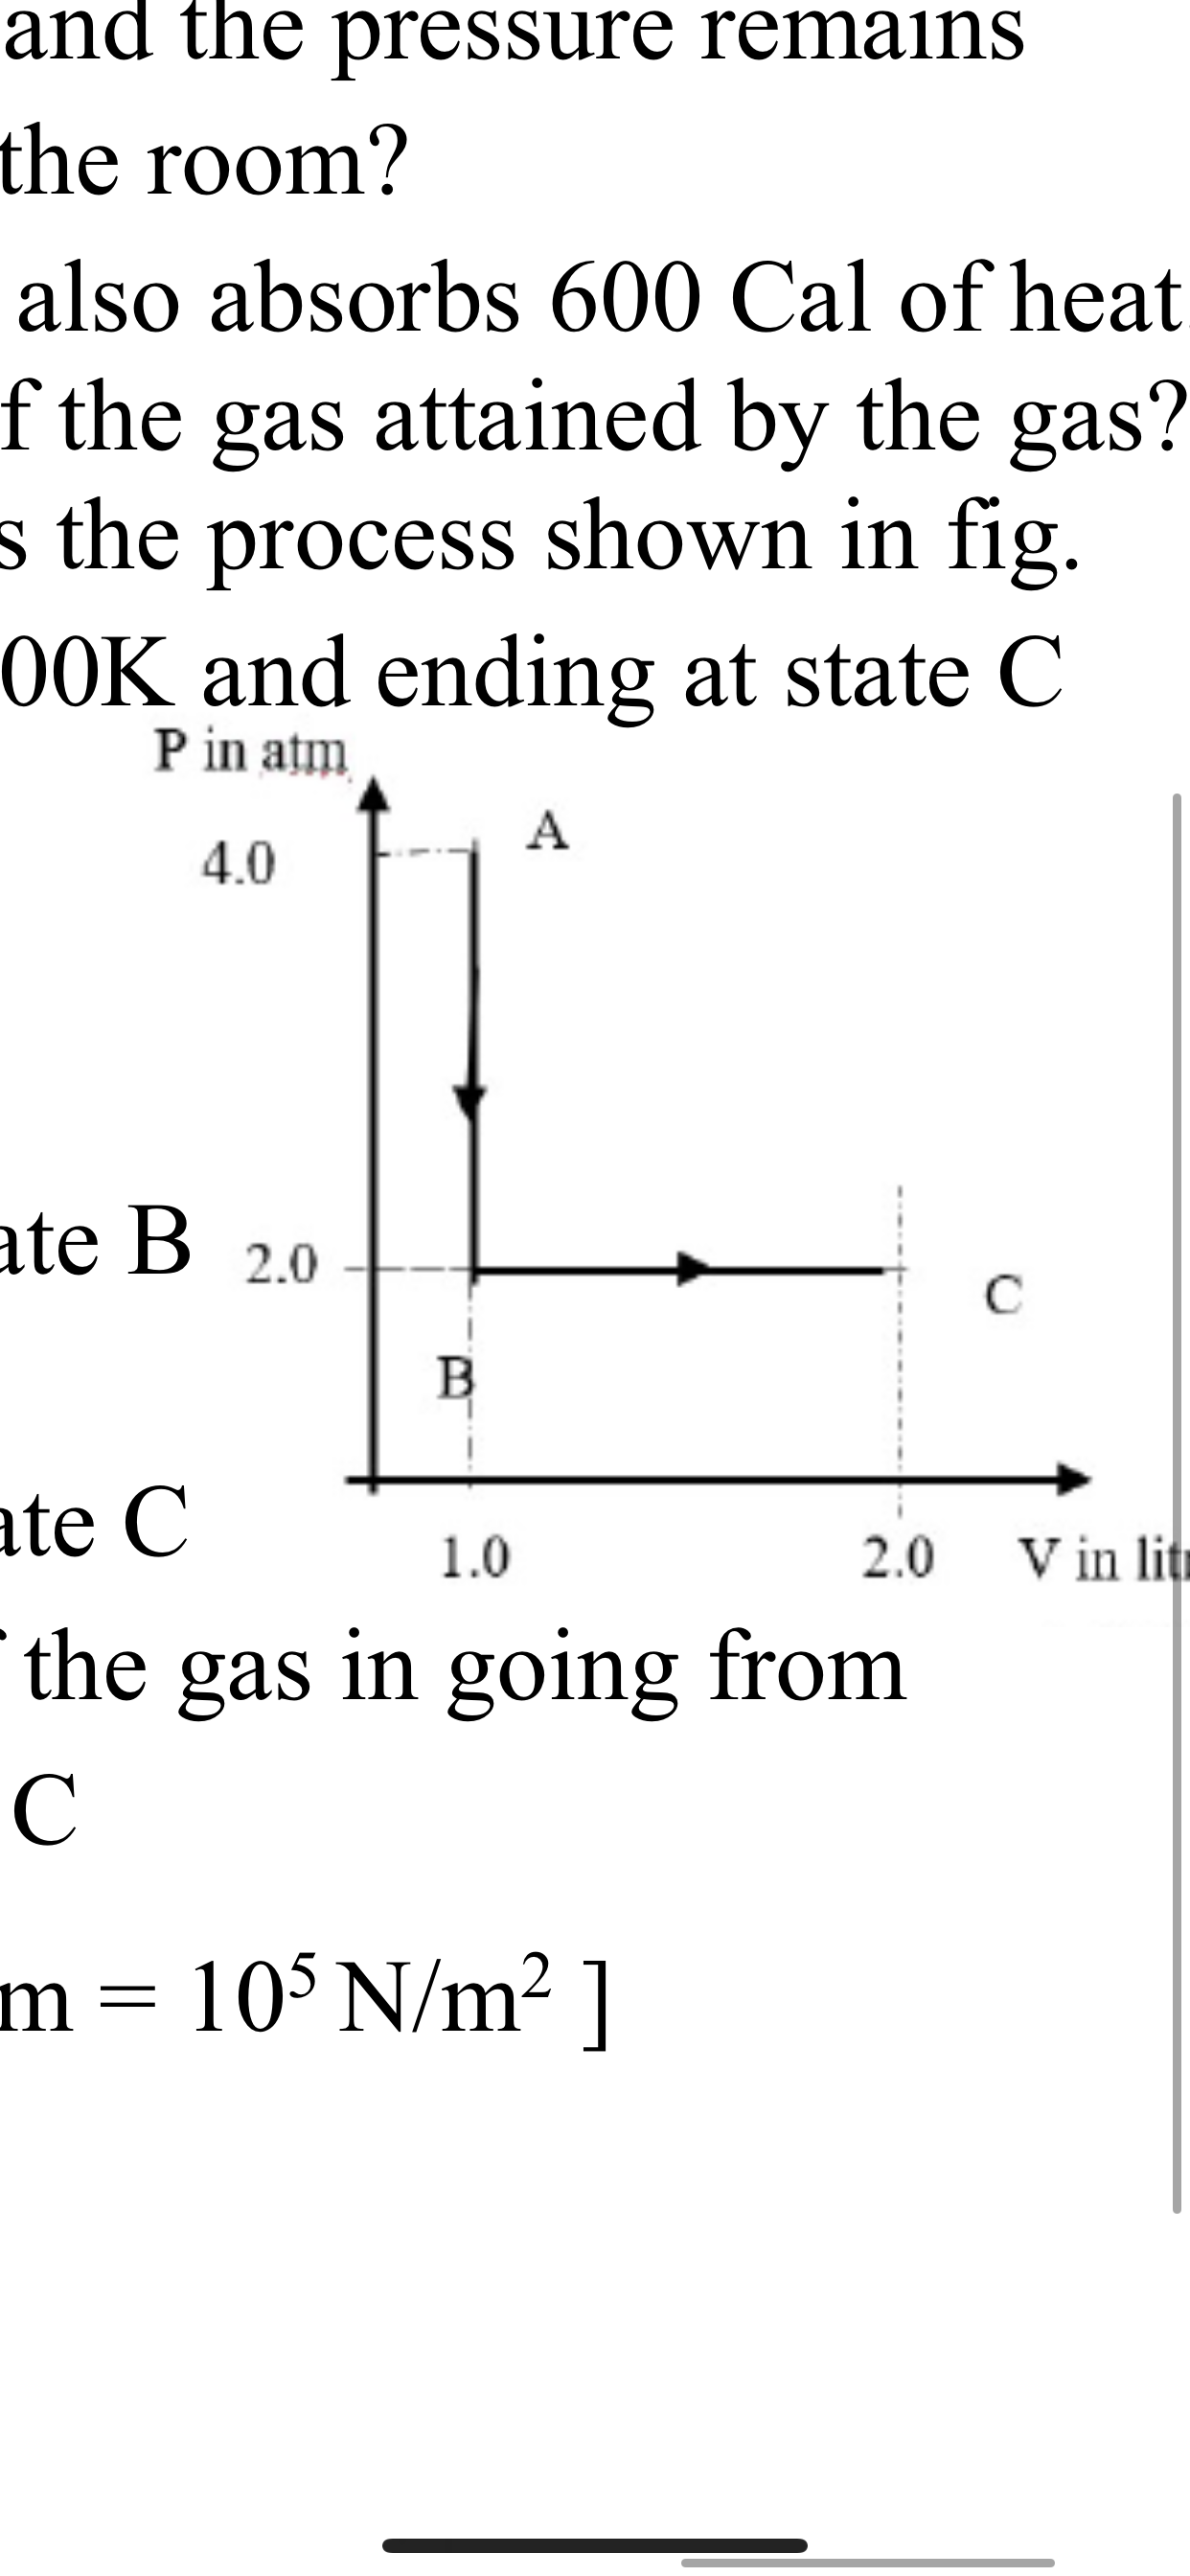 and the pressure remains
the room?
also absorbs 600 Cal of heat
f the gas attained by the gas?
s the process shown in fig.
OOK and ending at state C
P in atm
4.0
ate B 2.0
ate C
1.0
2.0
V in lit
the gas in going from
m= 10$ N/m2 ]
